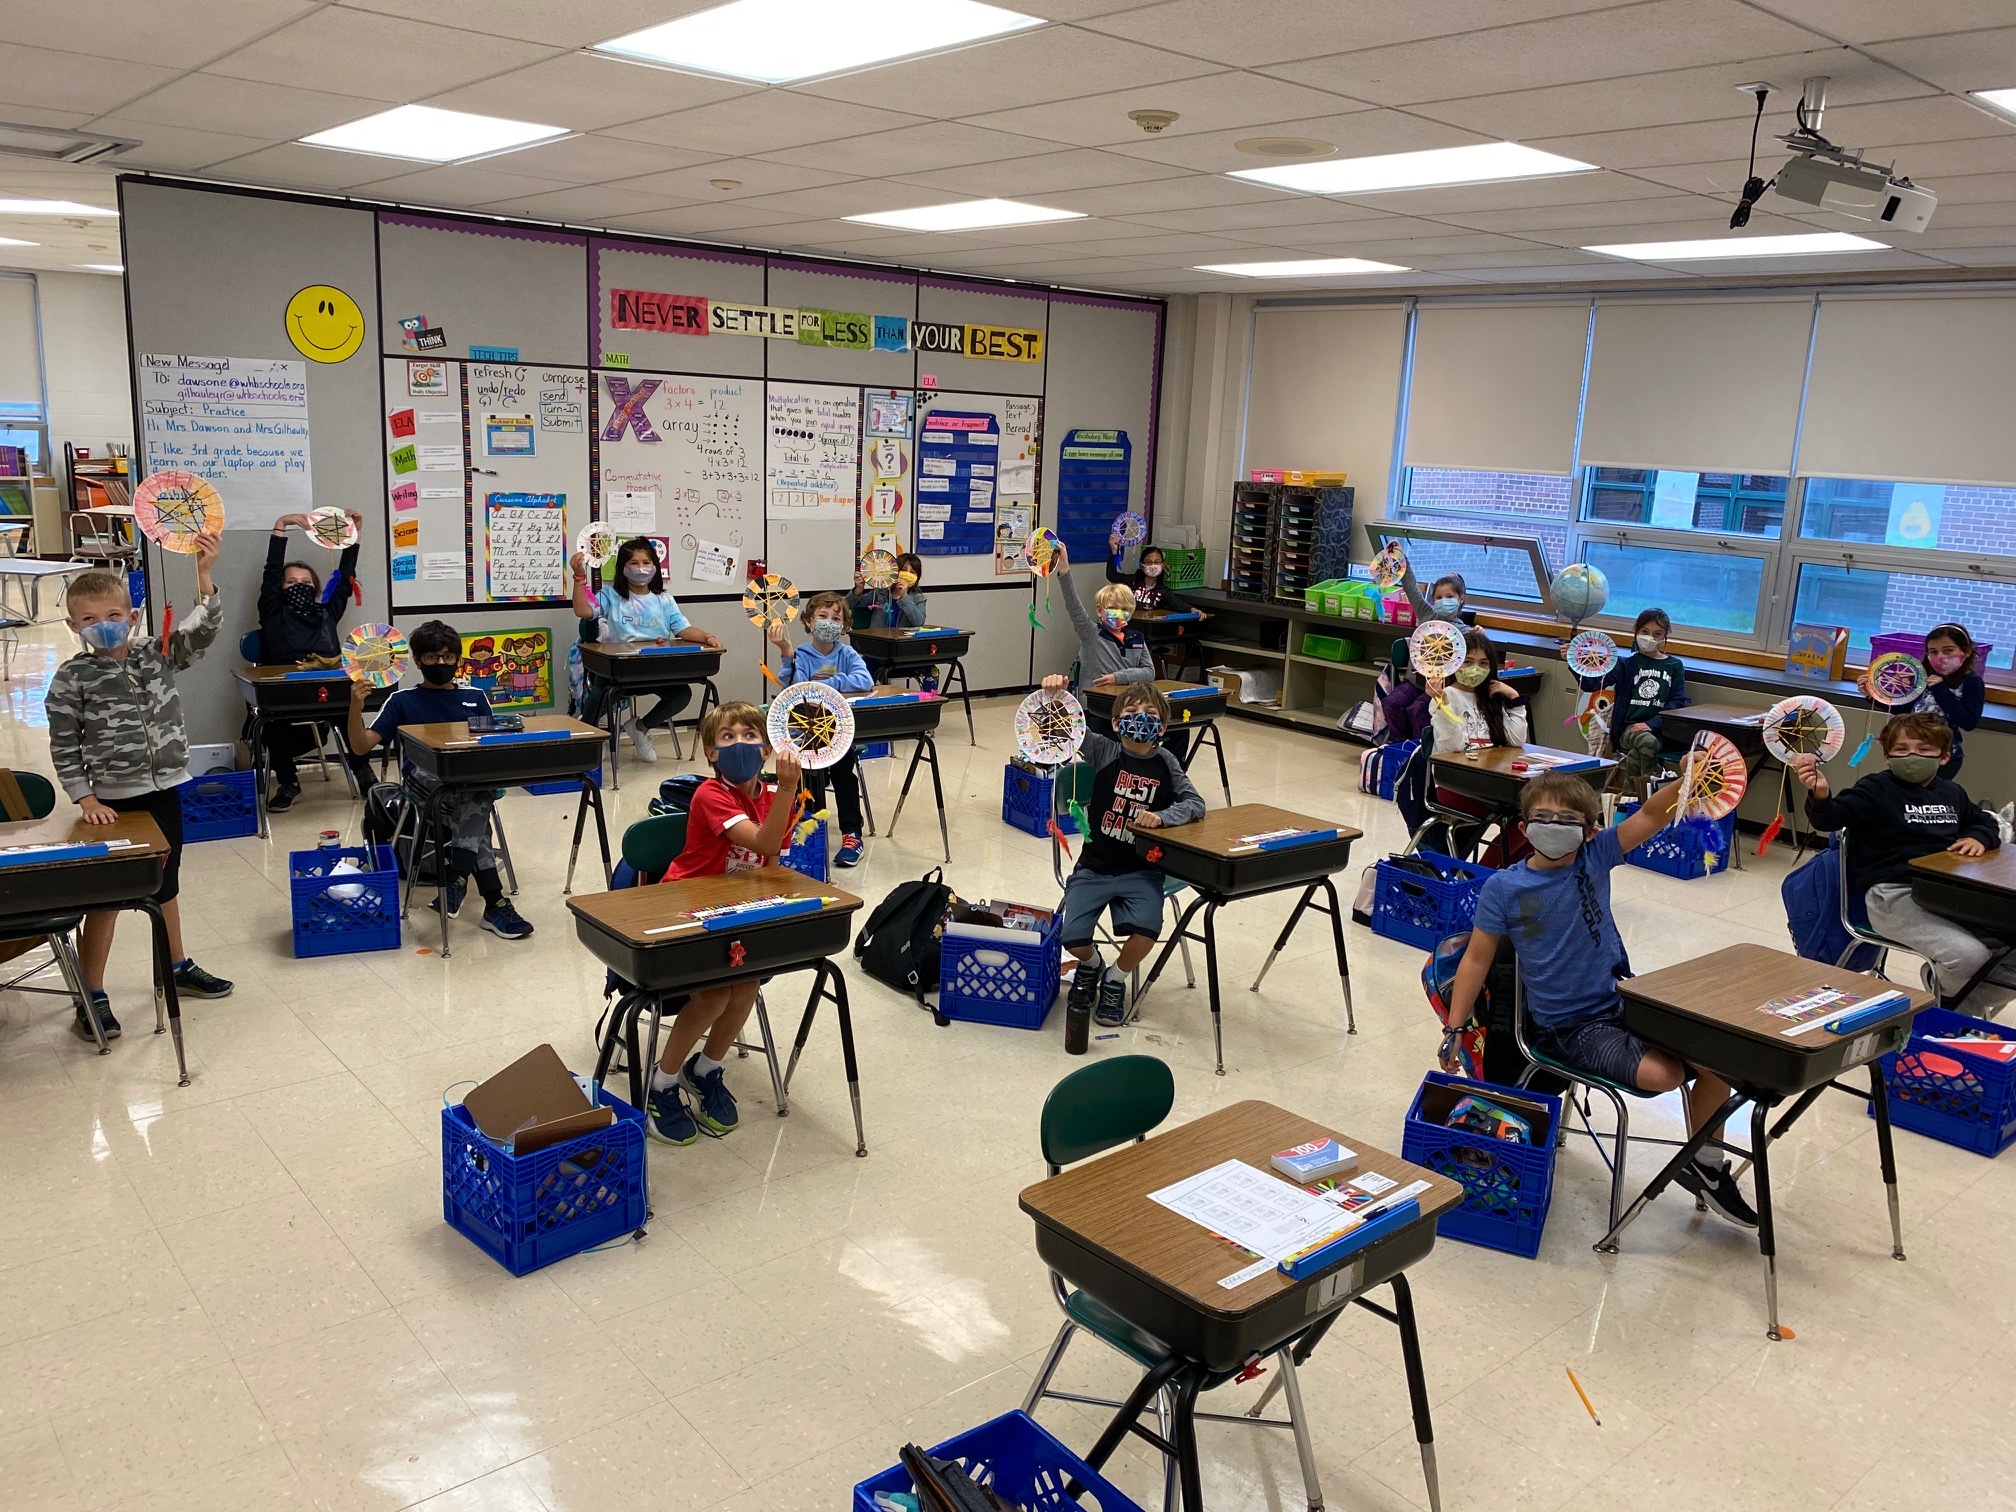 To coincide with a unit of study on cultures around the world, third graders at Westhampton Beach Elementary School read the realistic fiction story “The Dream Catcher” to learn about the Ojibwe Native Americans. Inspired by the tale, they created their own dream catchers using paper plates, string and crayons. 